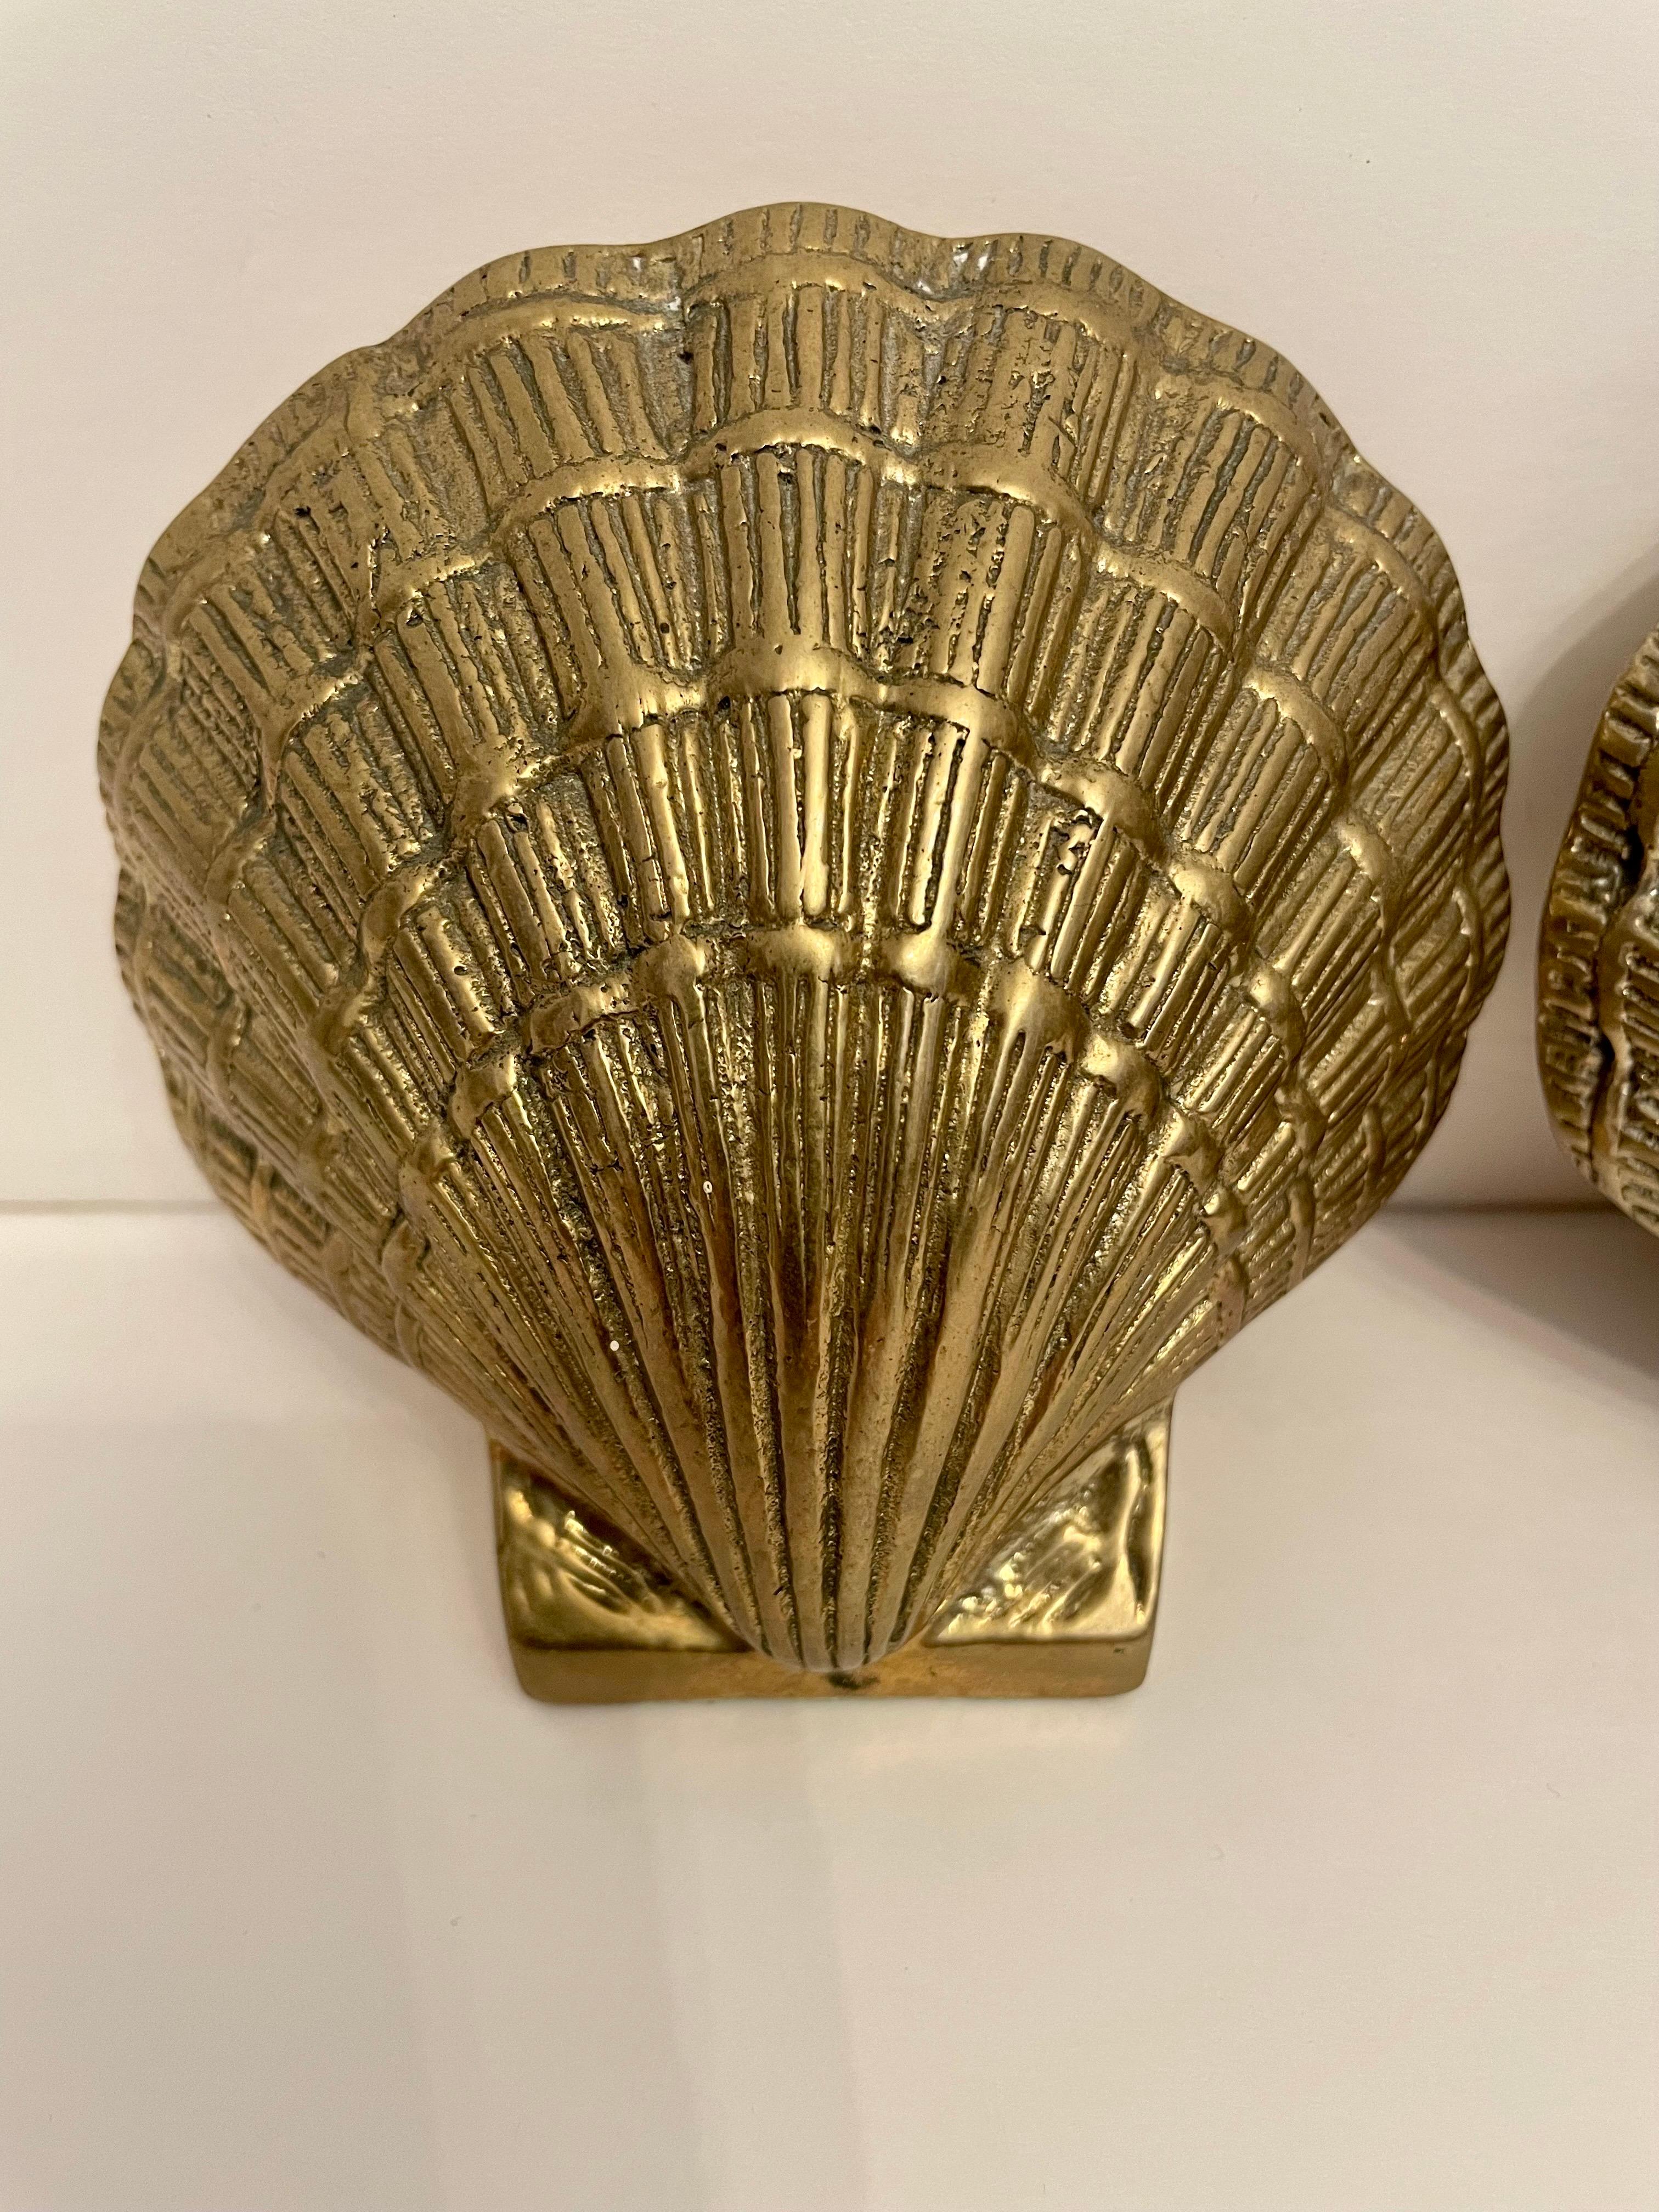 Pair brass clam shell or scallop seashell bookends. Nice condition. Ready to use. Slight patina from age and use. Good overall condition, hand polished.